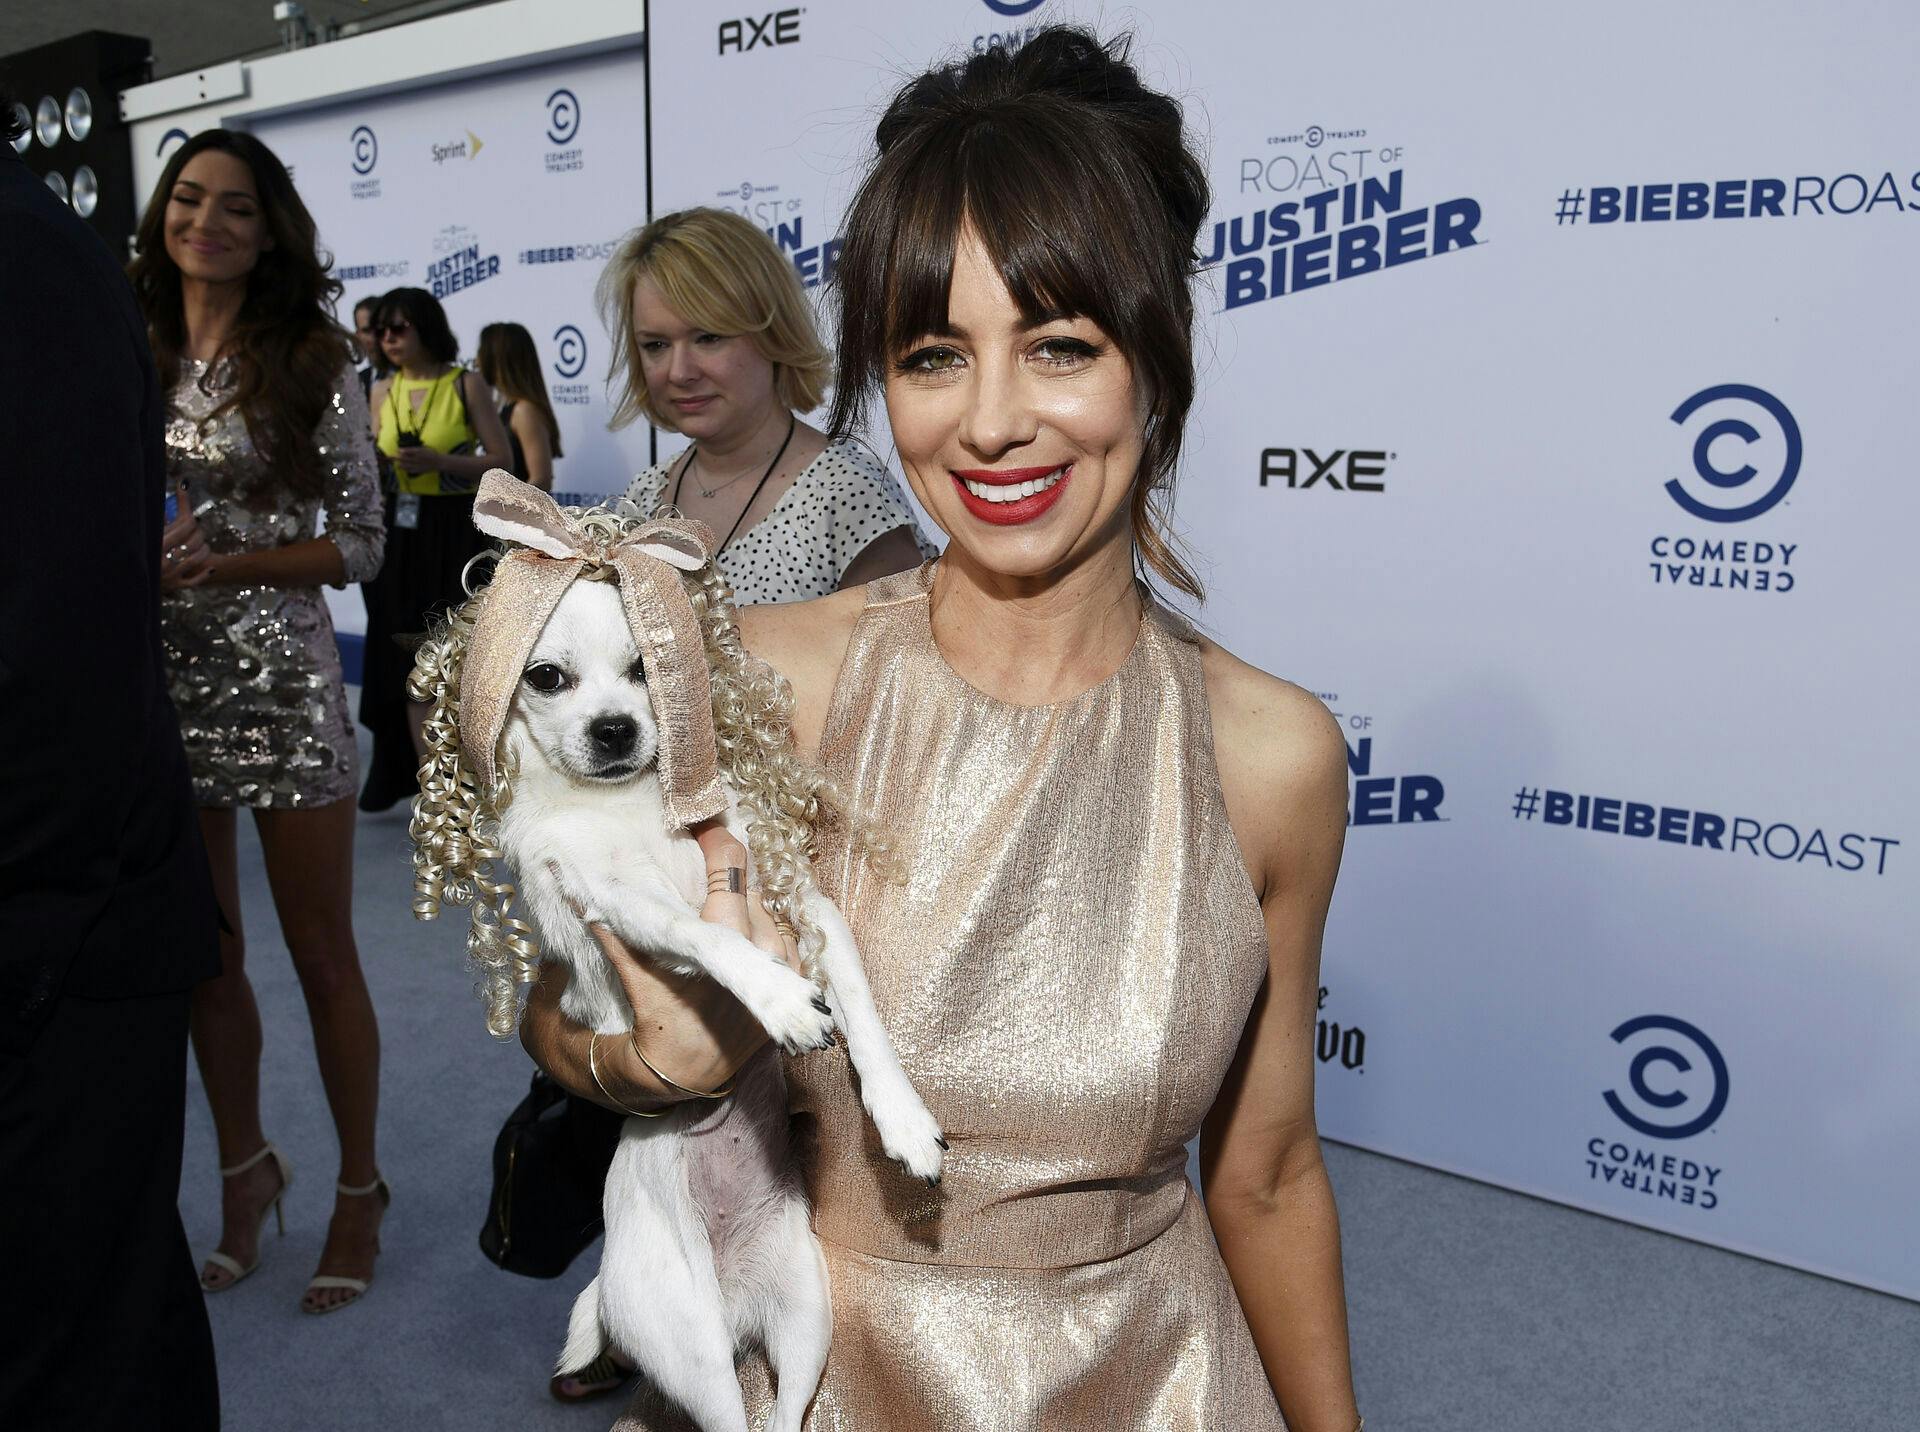 Actress and comedian Natasha Leggero poses during the Comedy Central Roast of Justin Bieber at Sony Studios in Culver City, California March 14, 2015. REUTERS/Kevork Djansezian (UNITED STATES – Tags: ENTERTAINMENT)